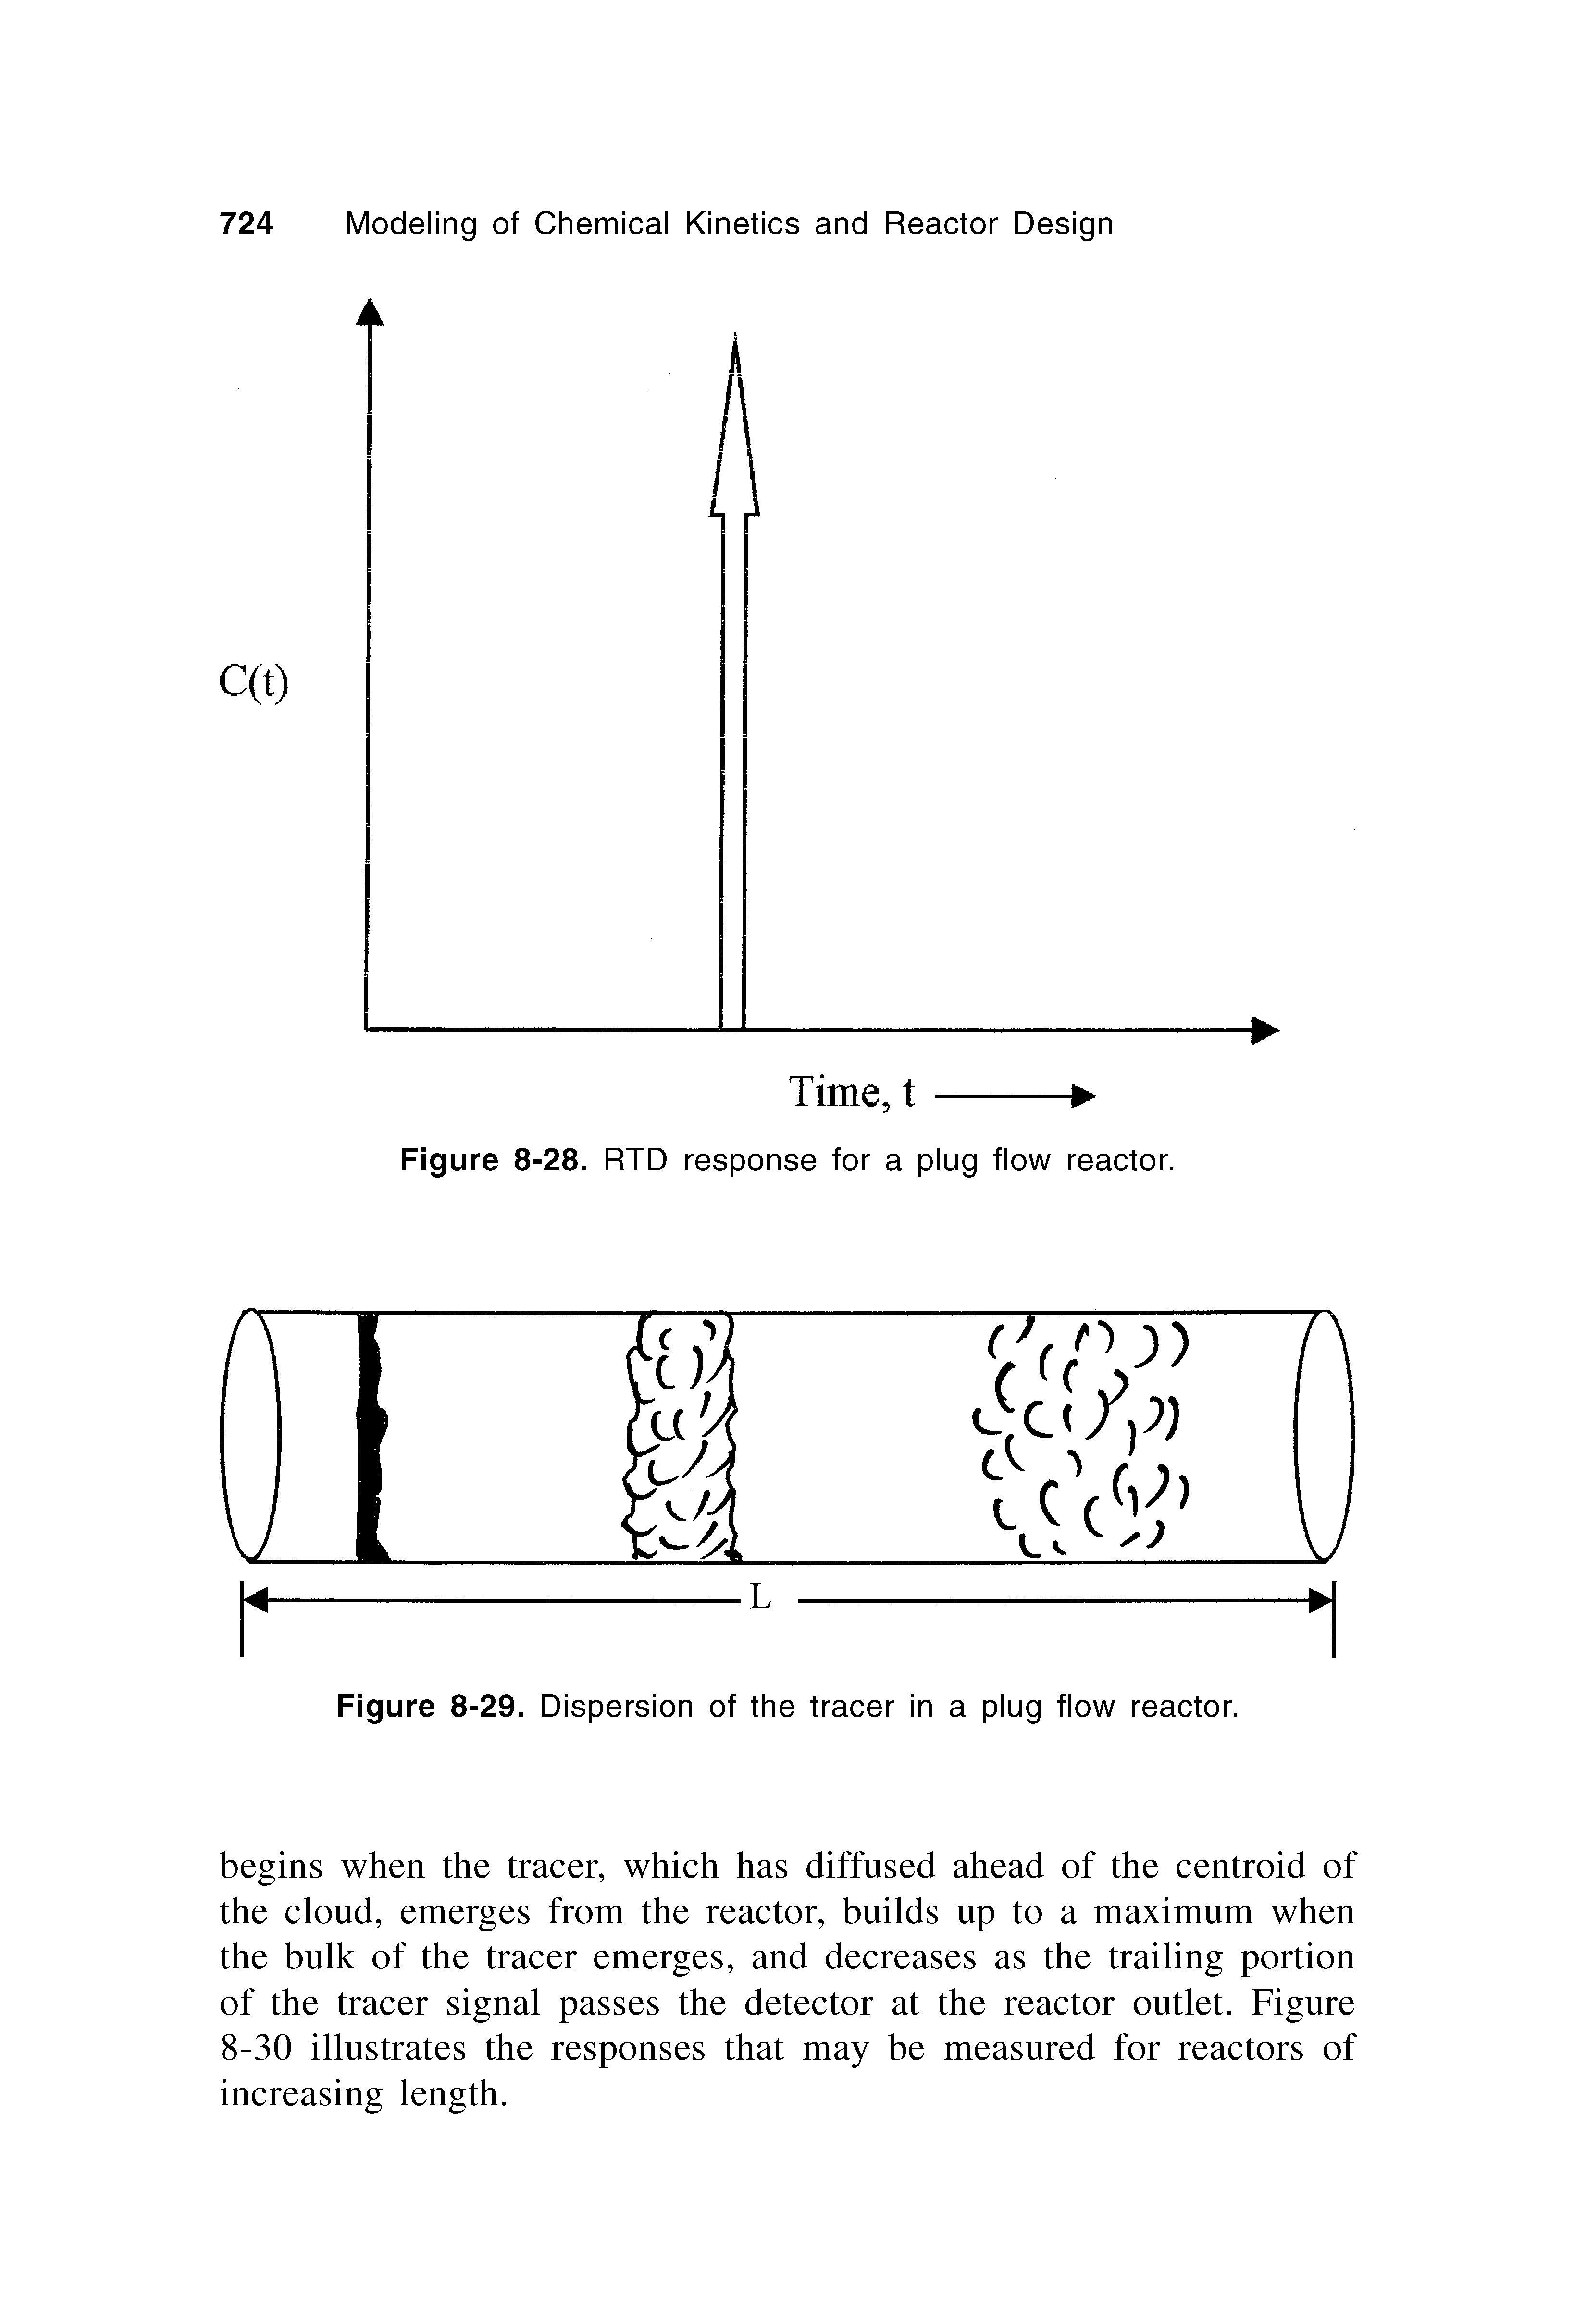 Figure 8-29. Dispersion of the tracer in a plug flow reactor.